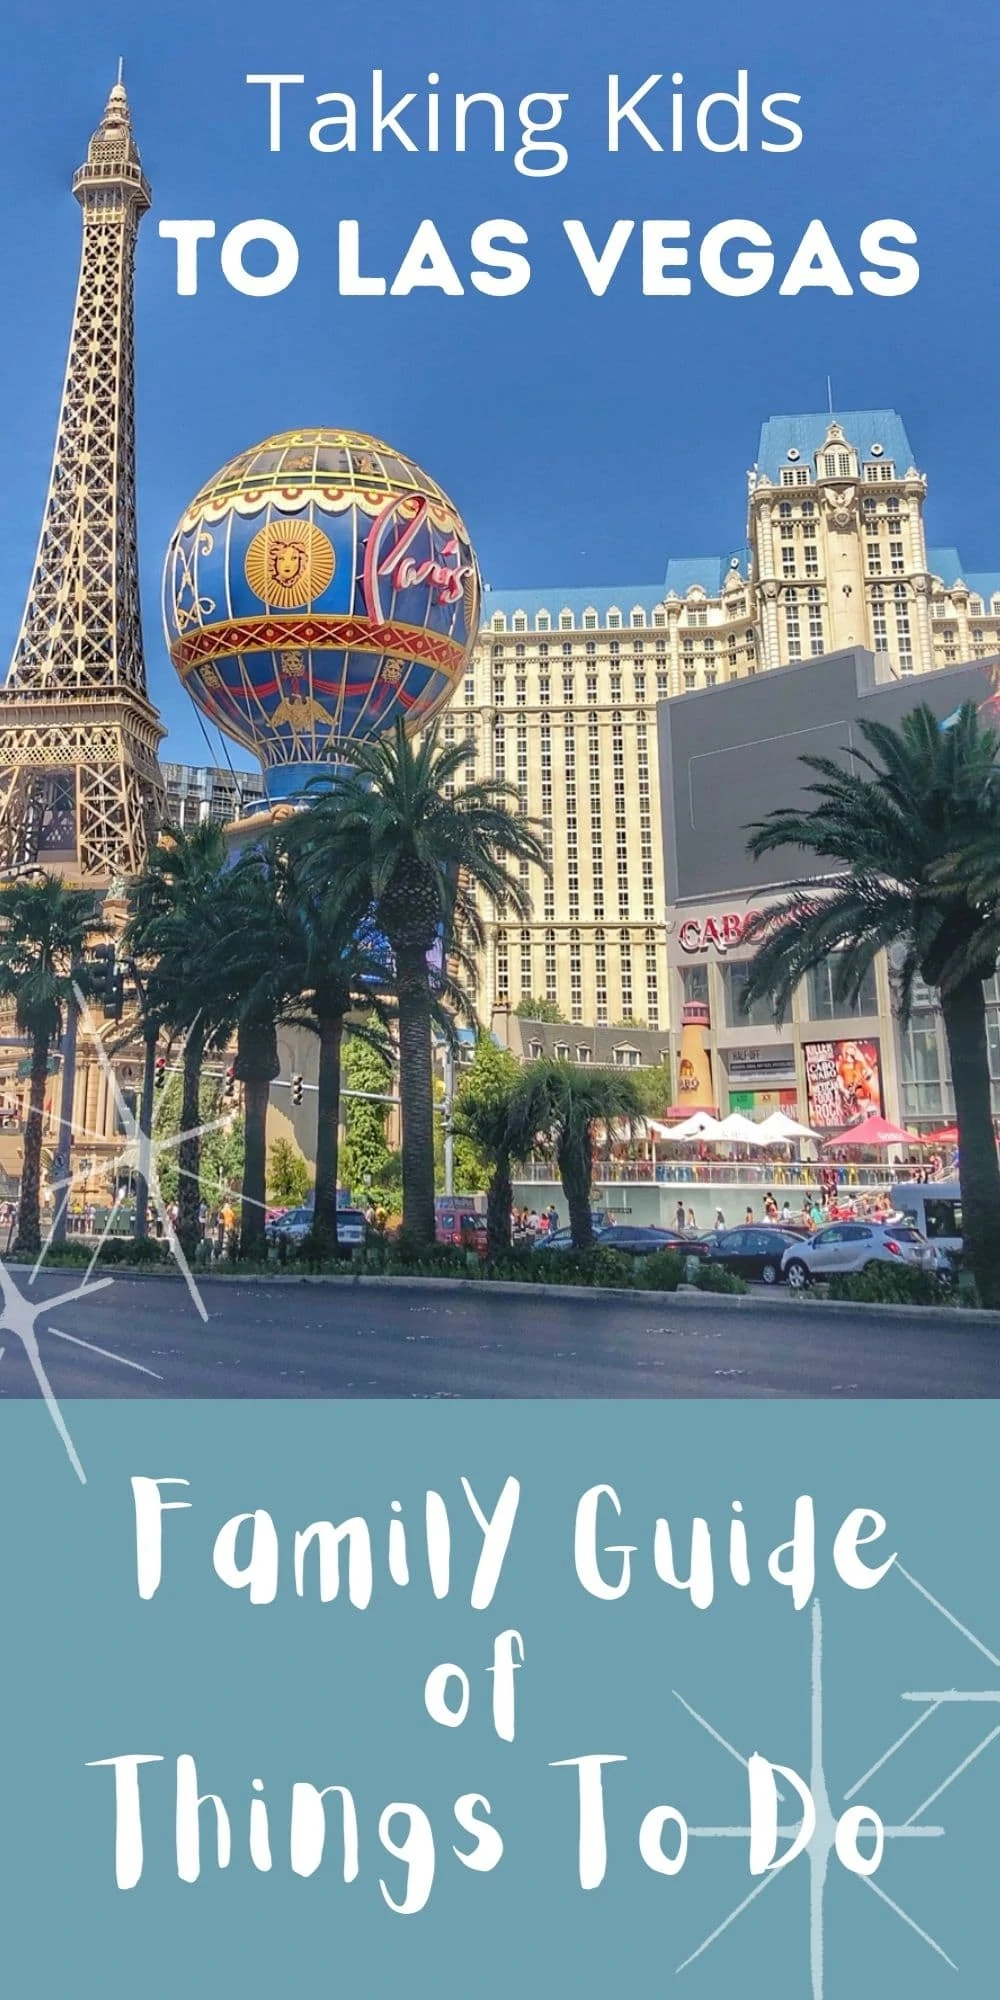 Taking Kids to Las Vegas - Family Guide of Things to Do